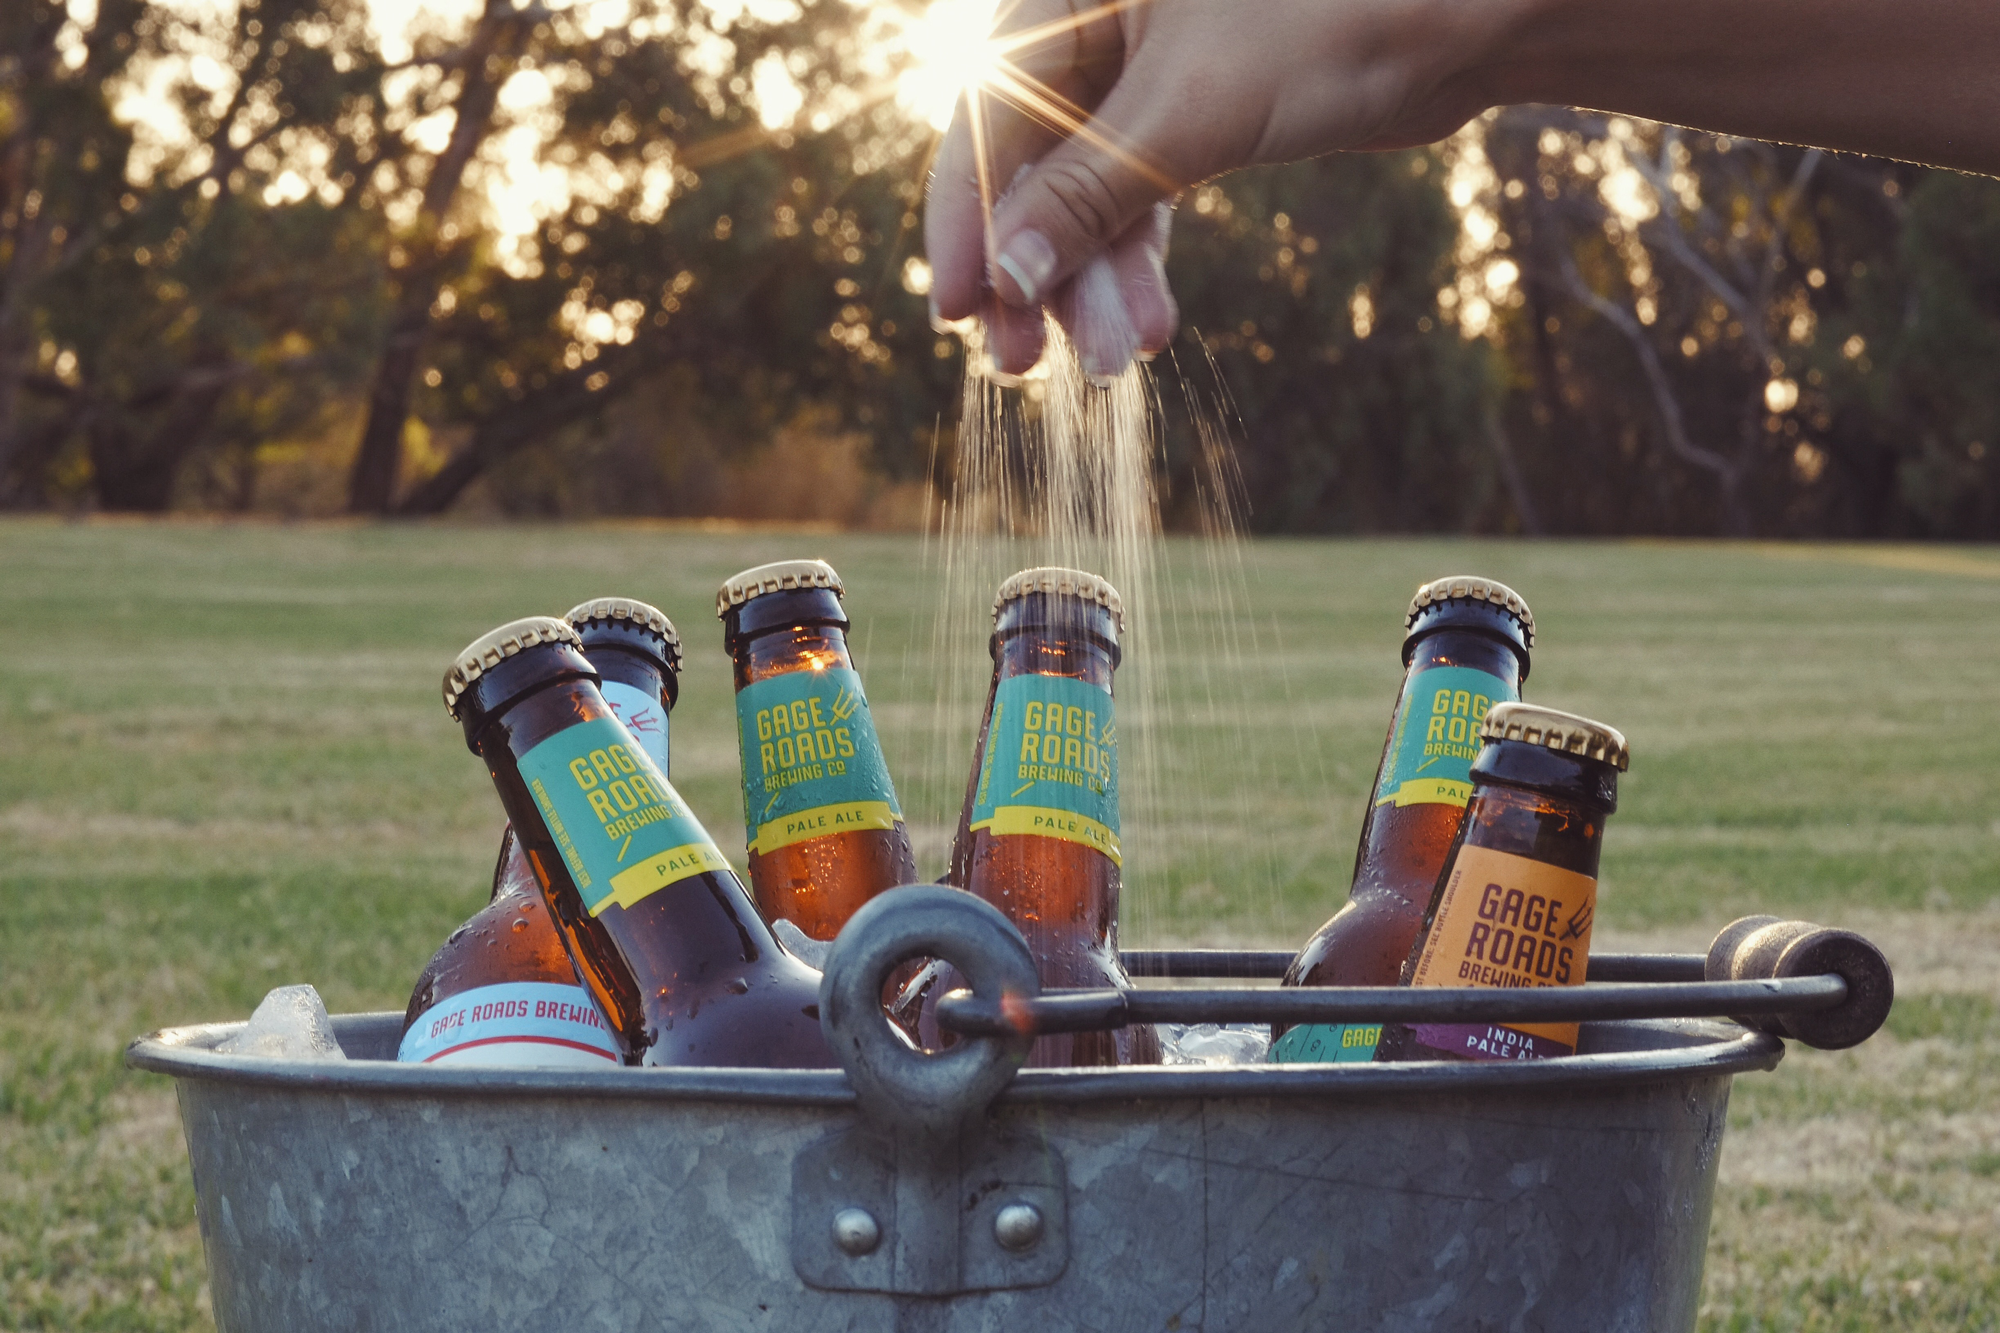 The Best Ways to Chill Beer Fast - The CoolBot Blog